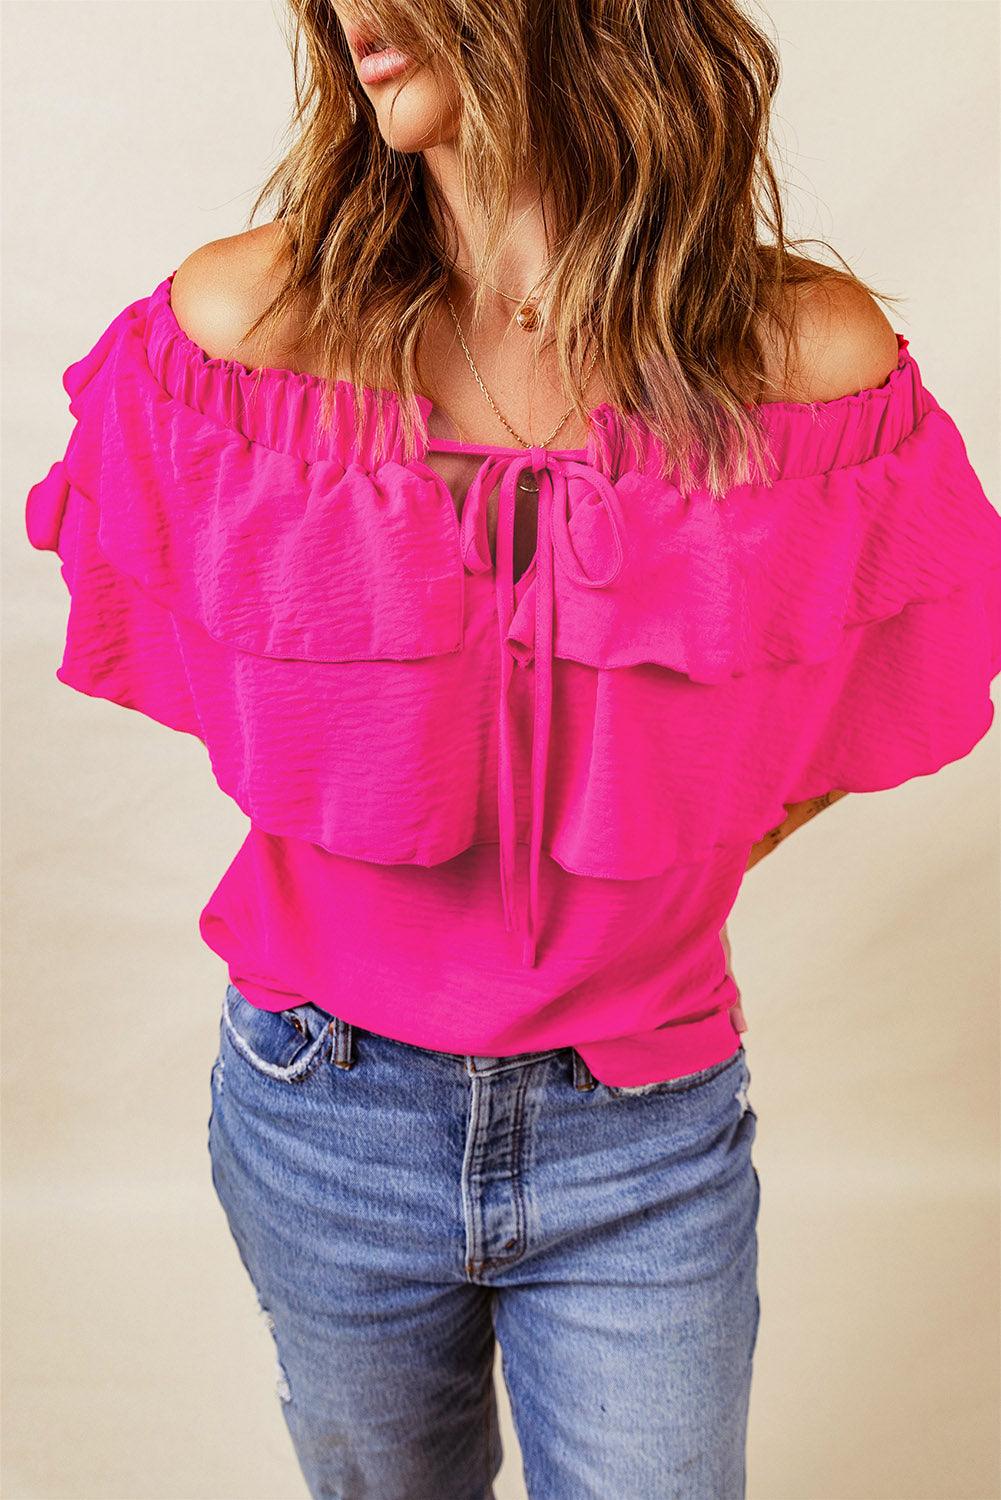 Women's Shirts Tied Off-Shoulder Layered Blouse